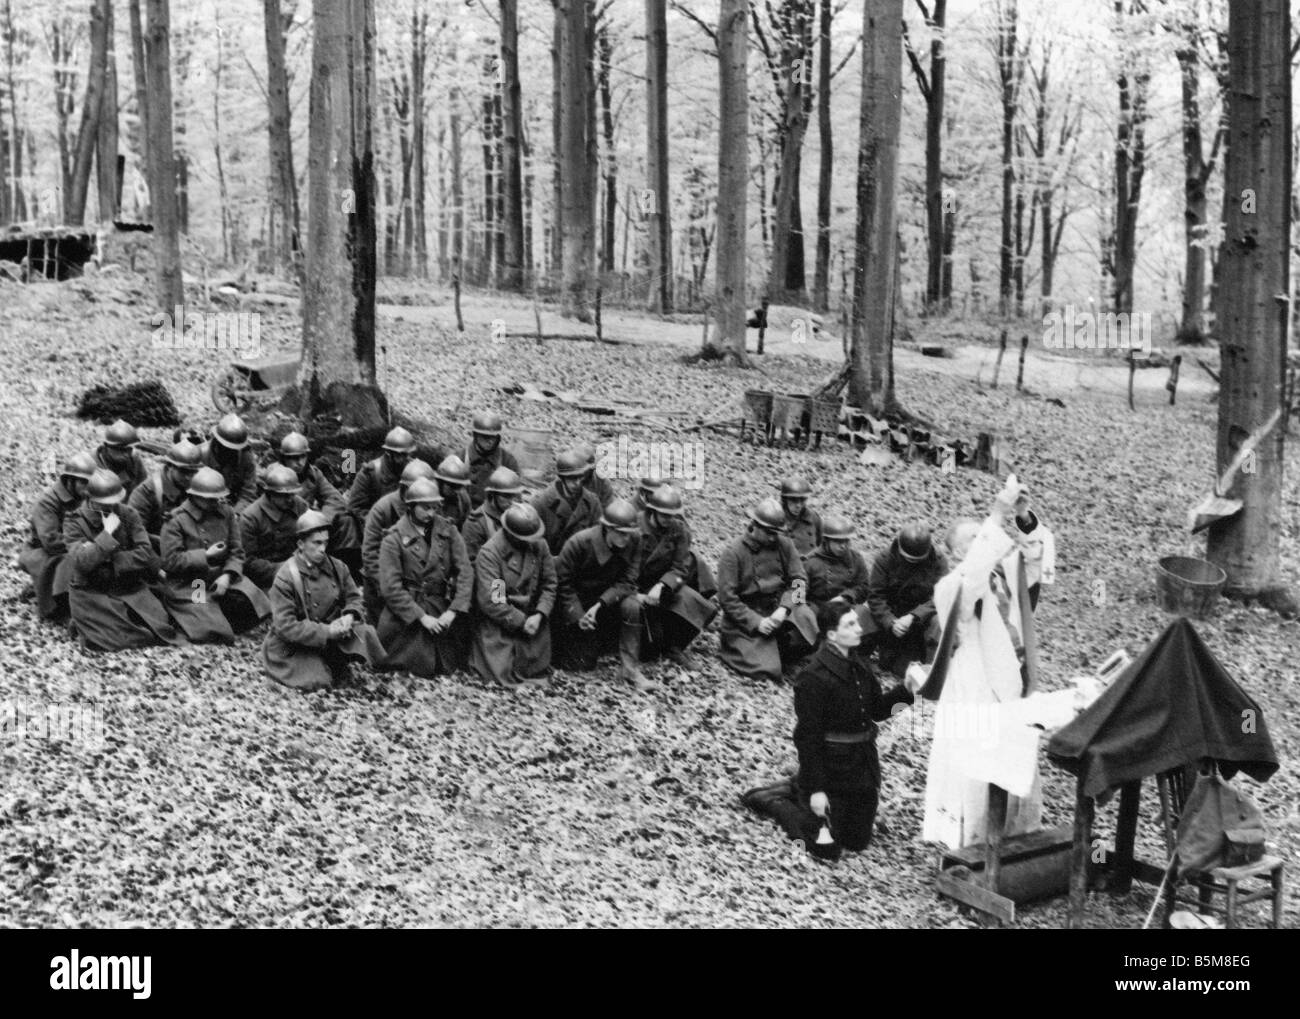 Service for French troops World War I History World War I France Field service for French troops in a wood Photo undated Stock Photo